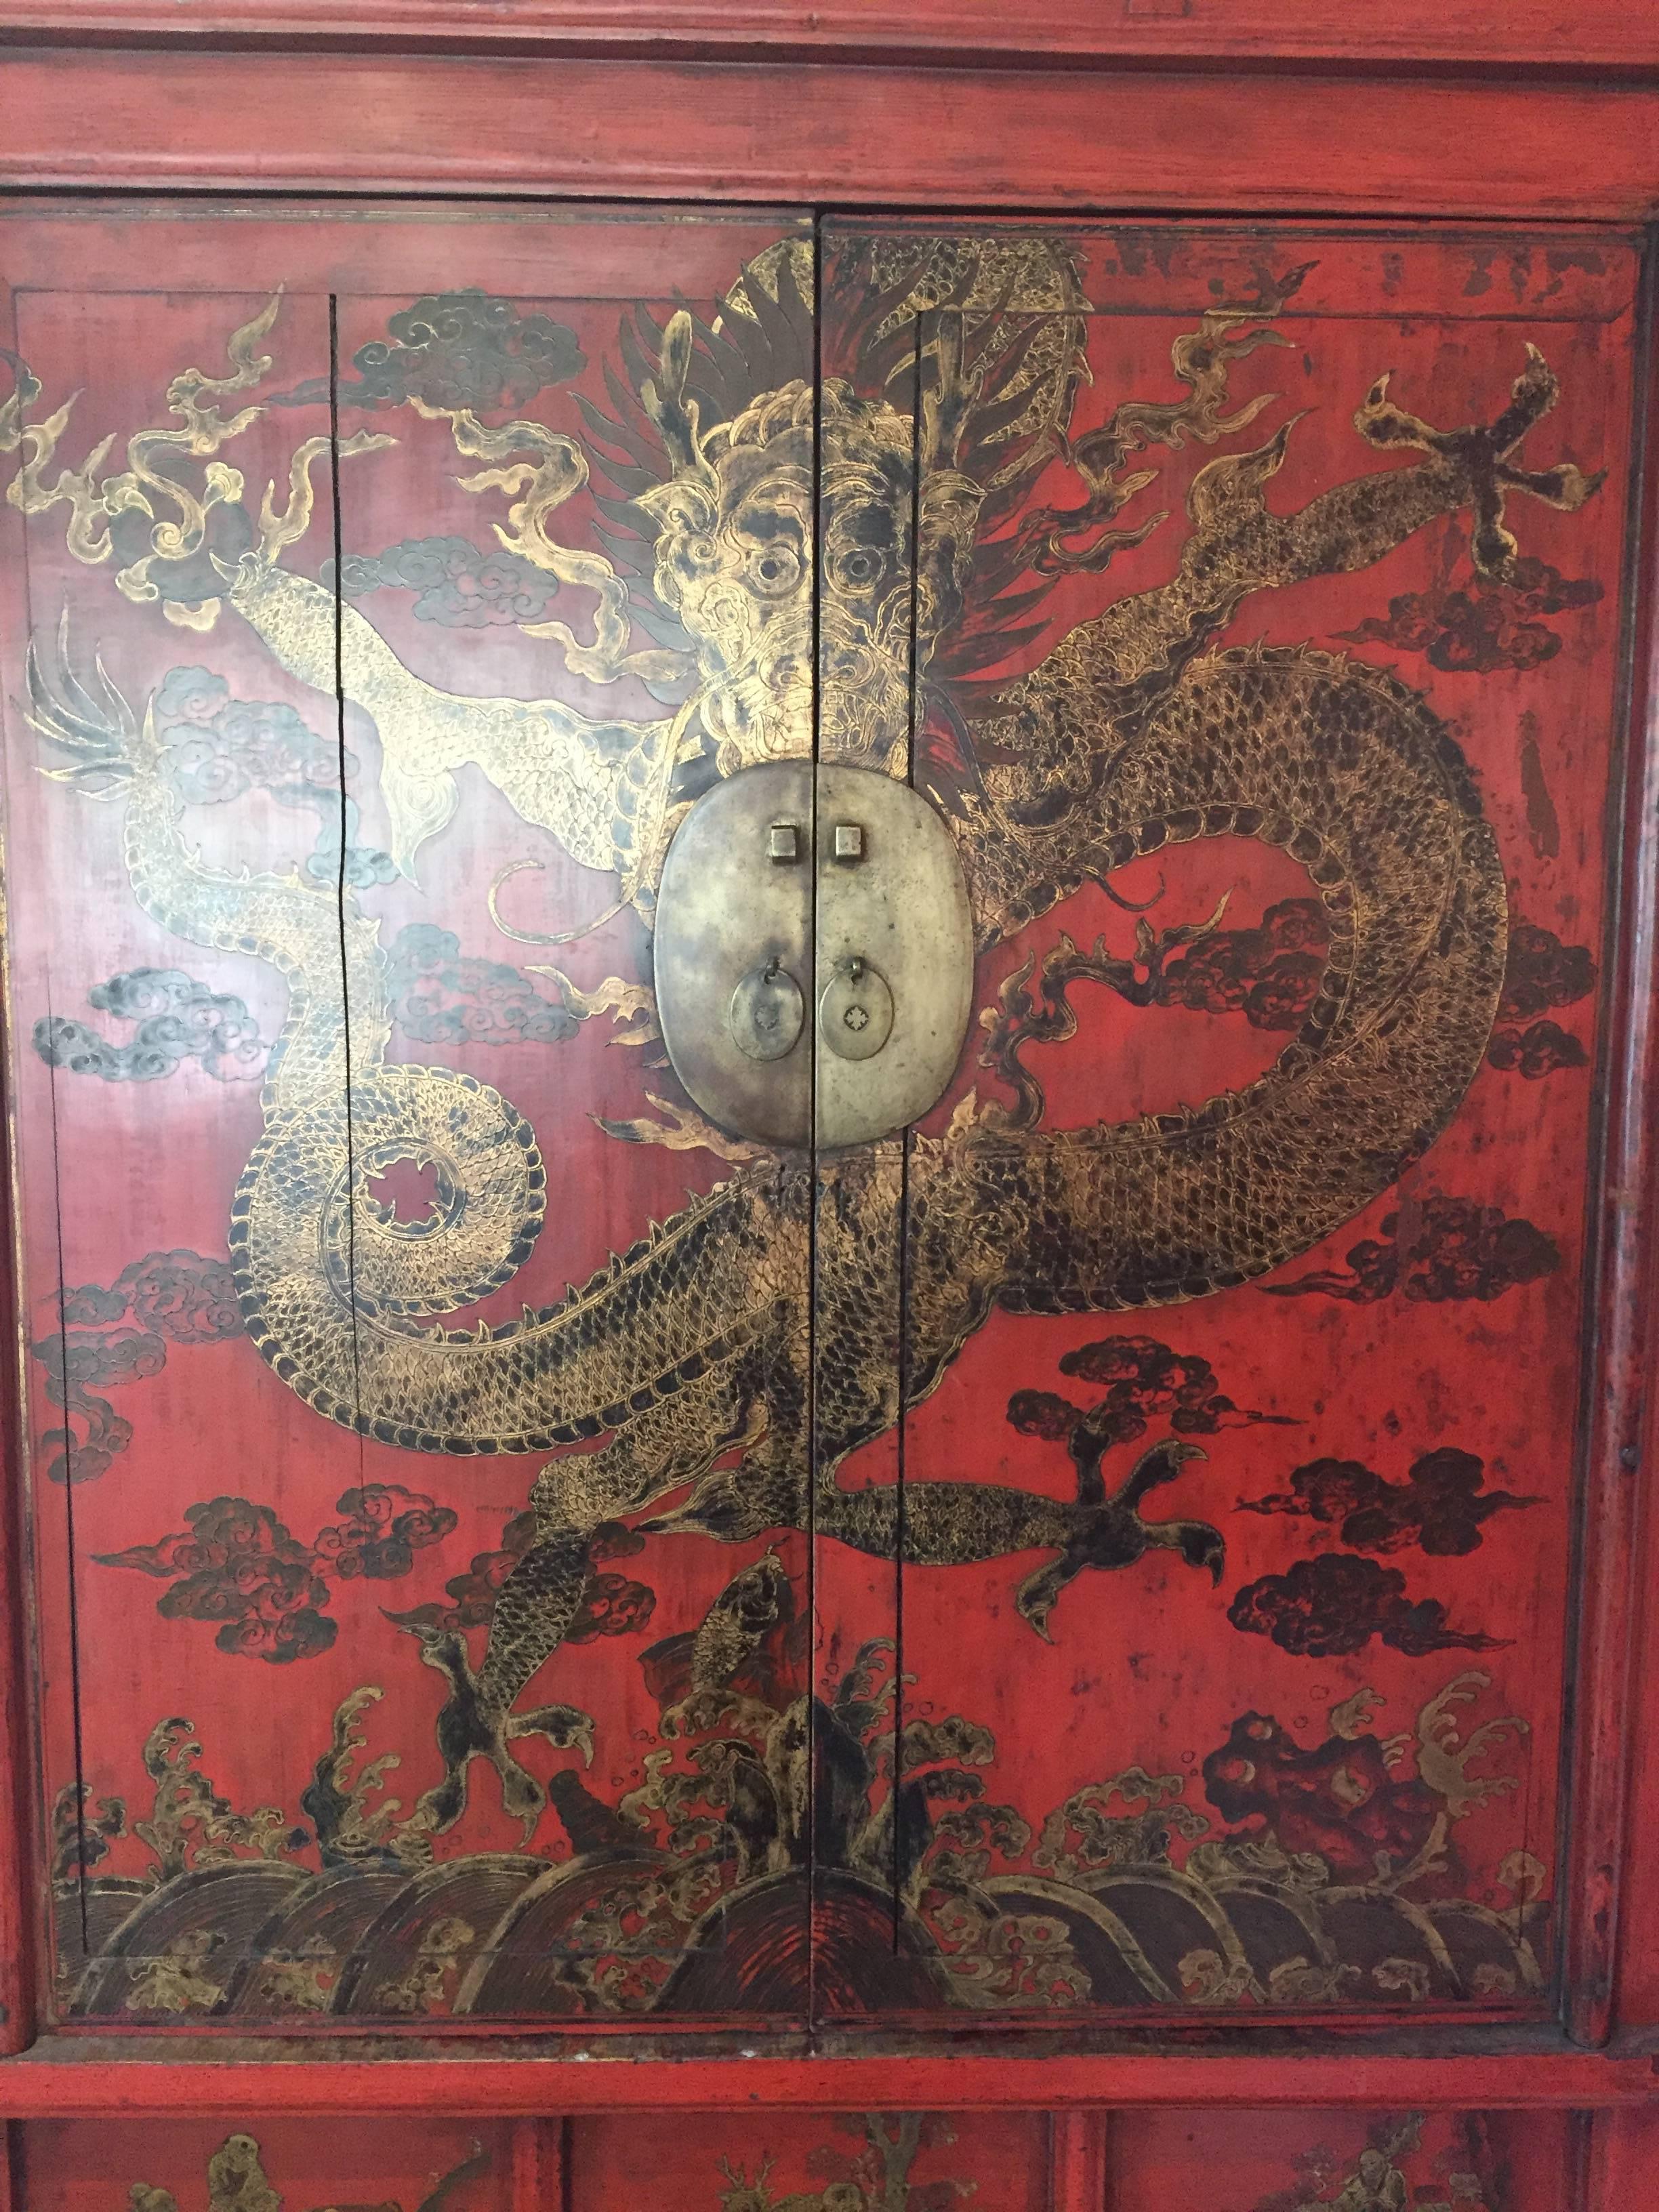 A fine tall Chinese antique dragon cabinet with prolific red lacquer and gold gilt details.

Dimensions: Exterior is 82 inches high and 51 inches wide and 21 inches deep. Interior Shelves are 18 inches deep and 49 inches wide. 
Distance between